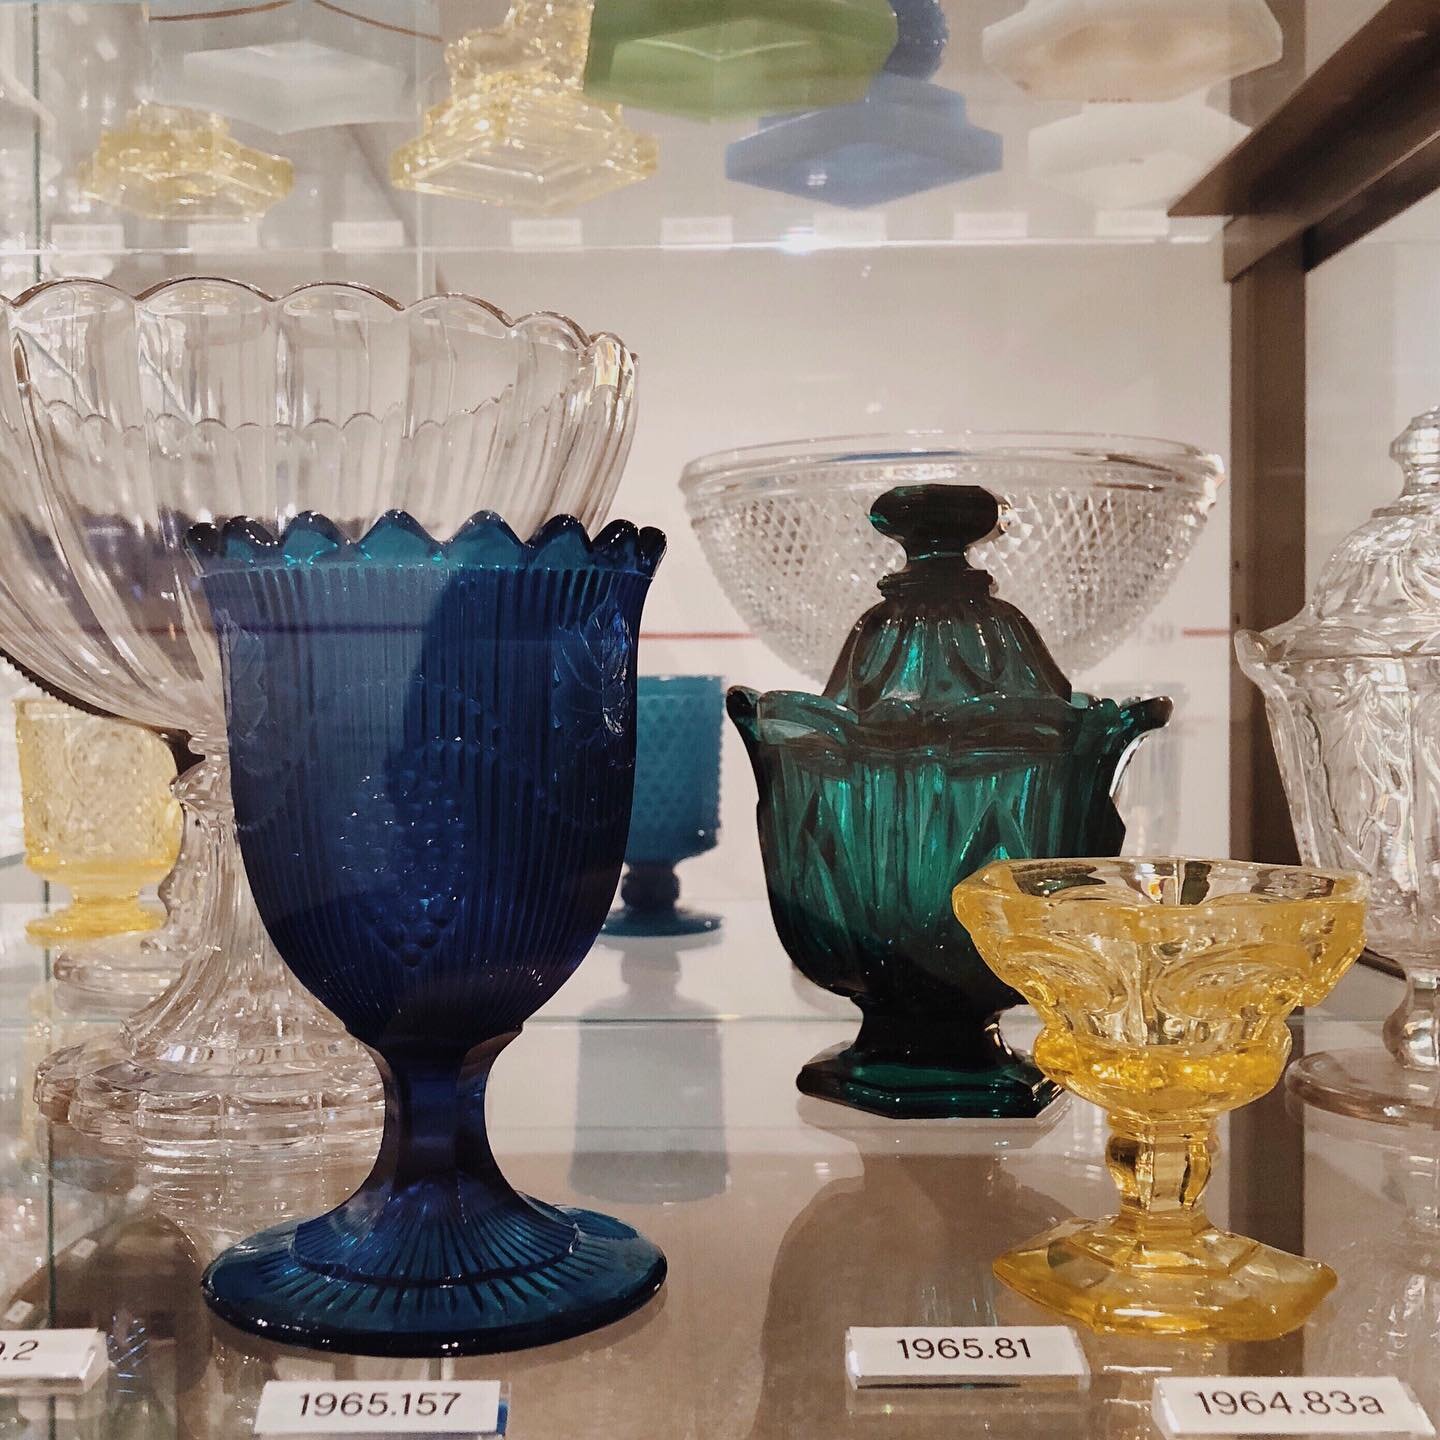 A few favorite 1960s colored glass vessels at the @toledomuseum&rsquo;s Glass Pavilion. 💎 Which one is your favorite?⠀
⠀
⠀
⠀
⠀
⠀
#styling #propstyling #style #propstylist #props #stylist #detroitstylist #madprops #props #setdesign #setdesigner #setd